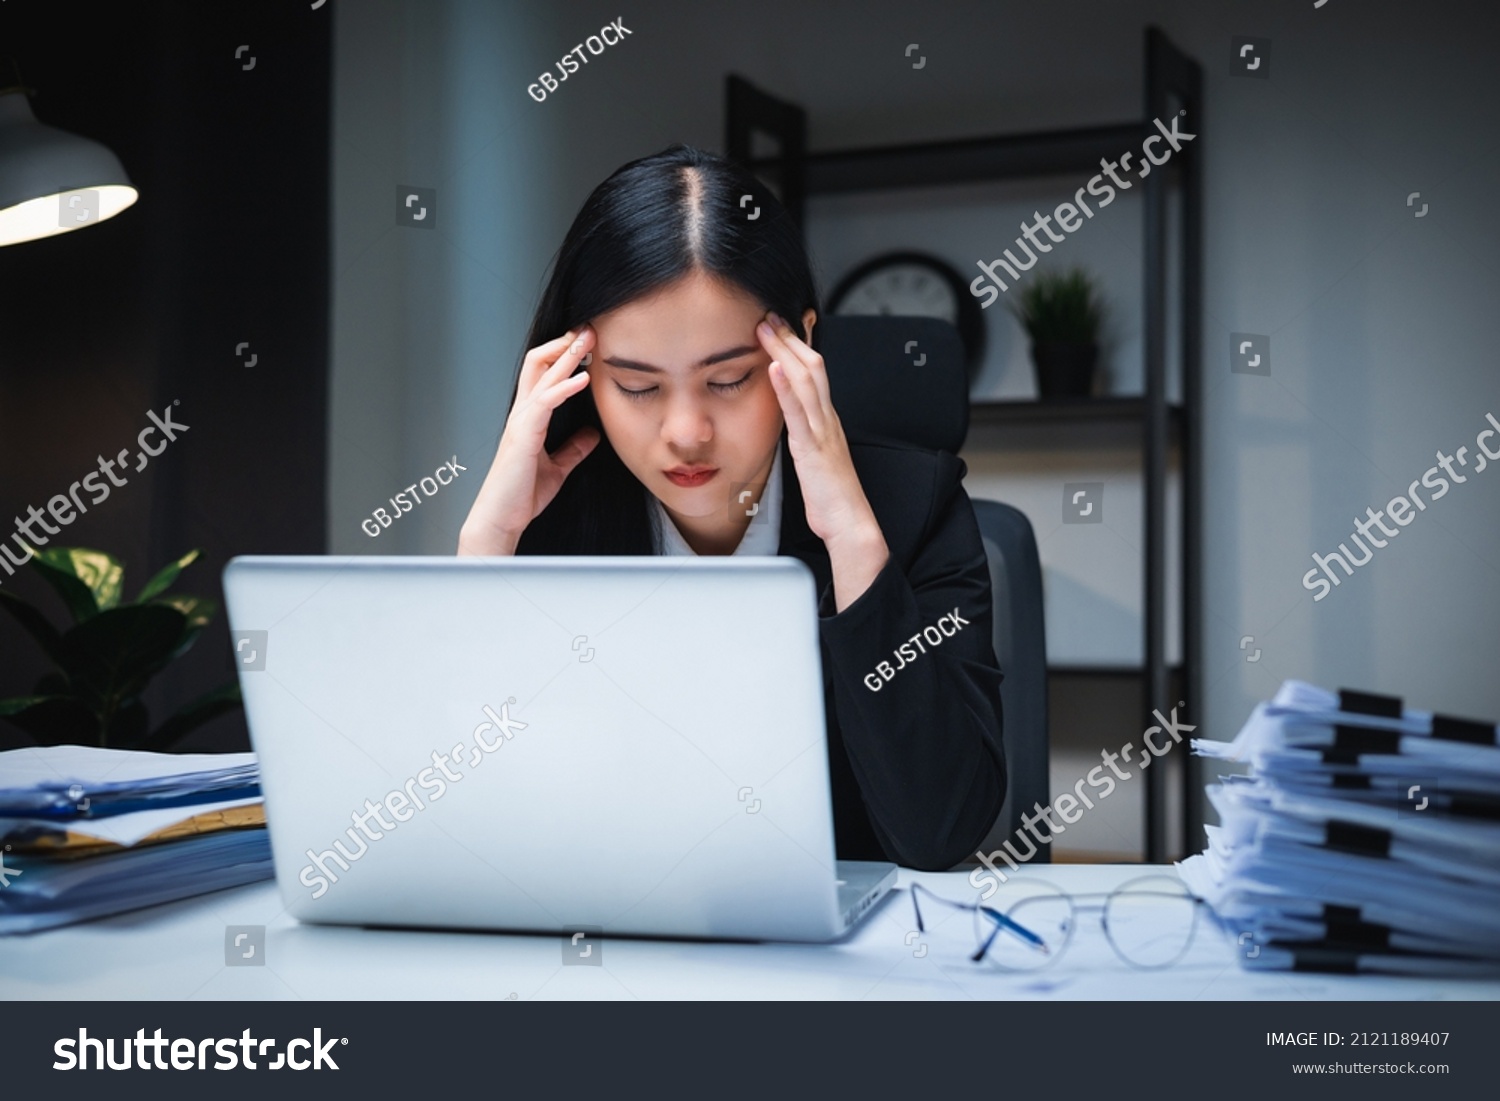 Stressed asian business woman working late at night in the office hands on head feeling headache. Tired woman looking at laptop working hard sitting in the dark room office. Overtime concept #2121189407